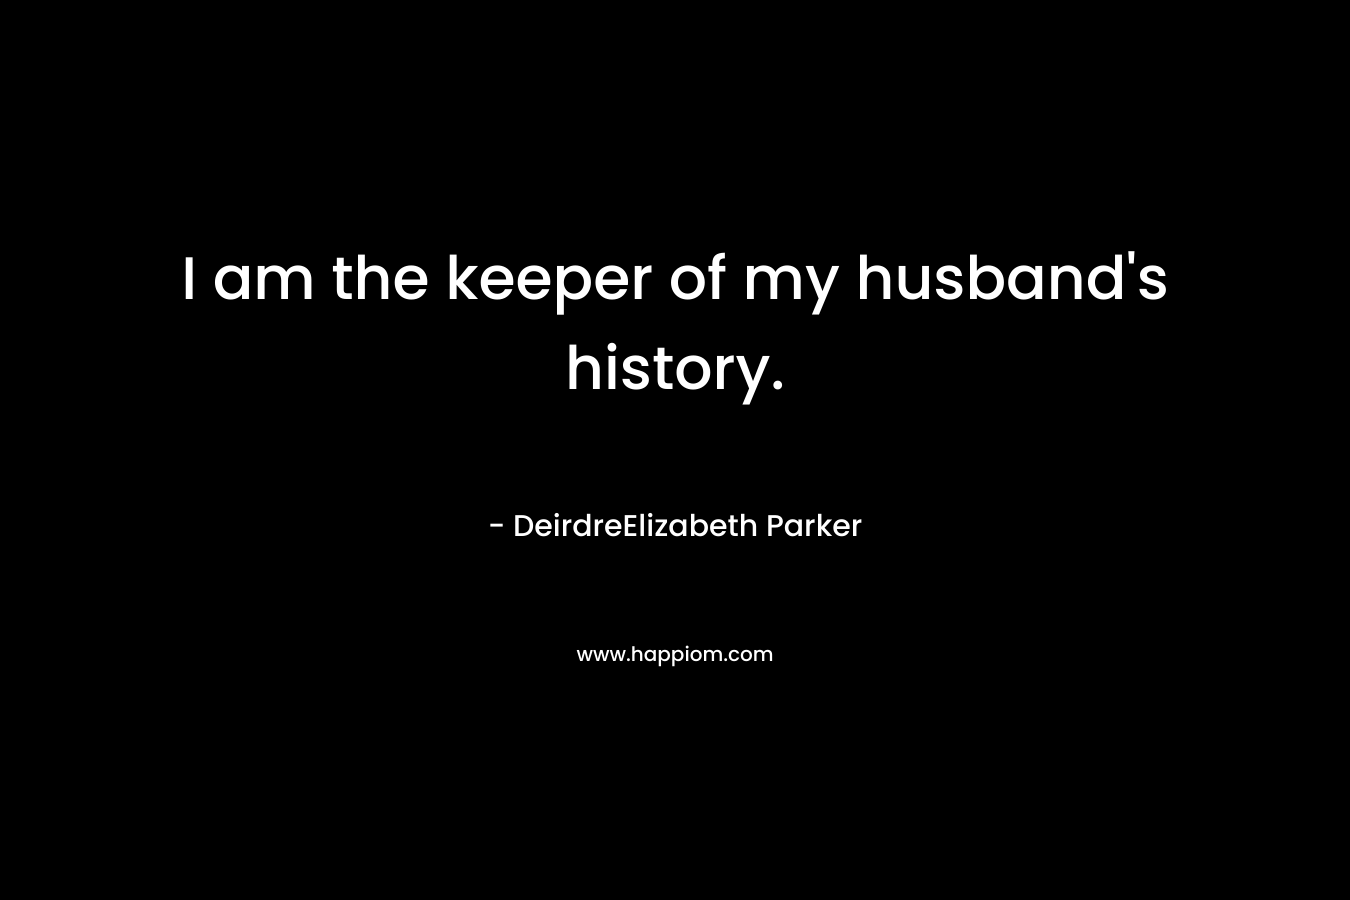 I am the keeper of my husband's history.